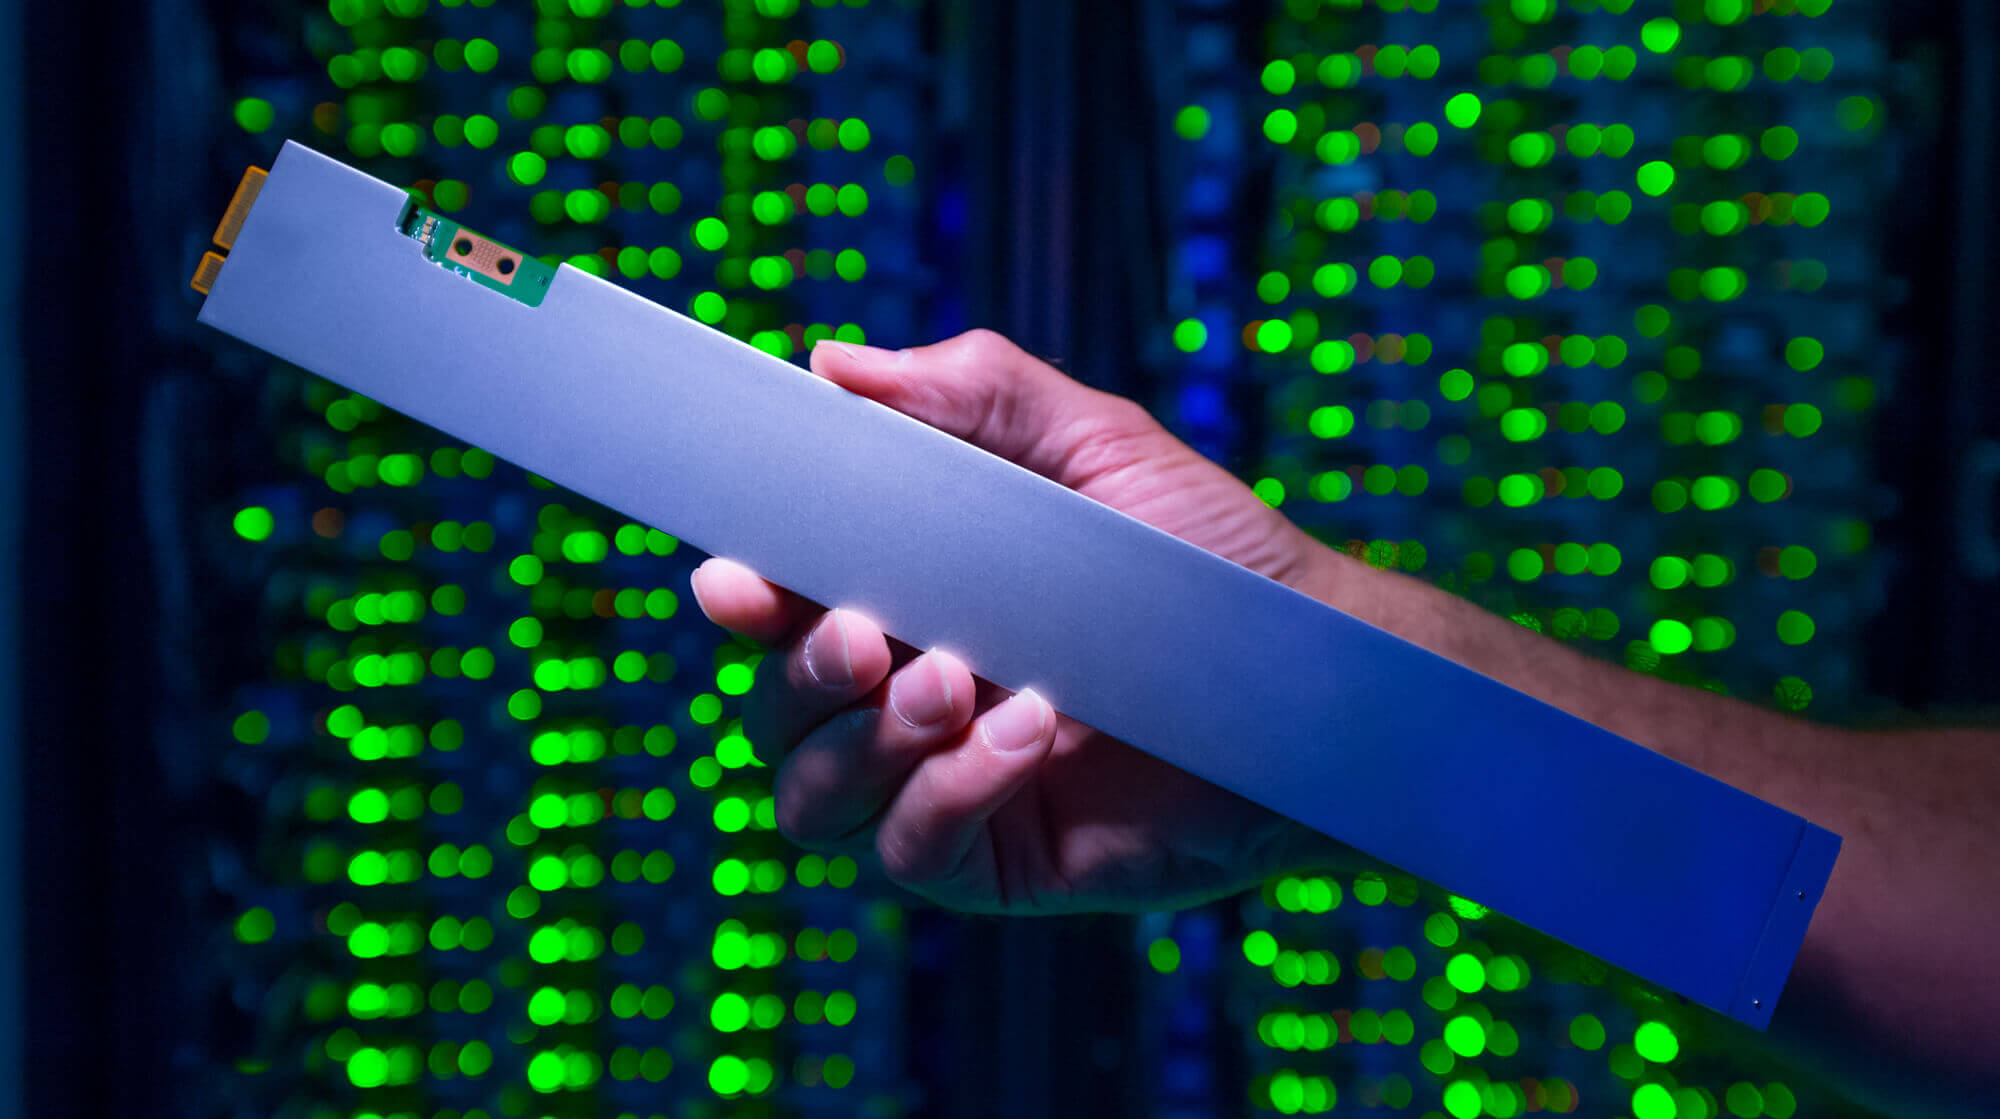 Intel builds a ruler-shaped SSD to set new storage density record